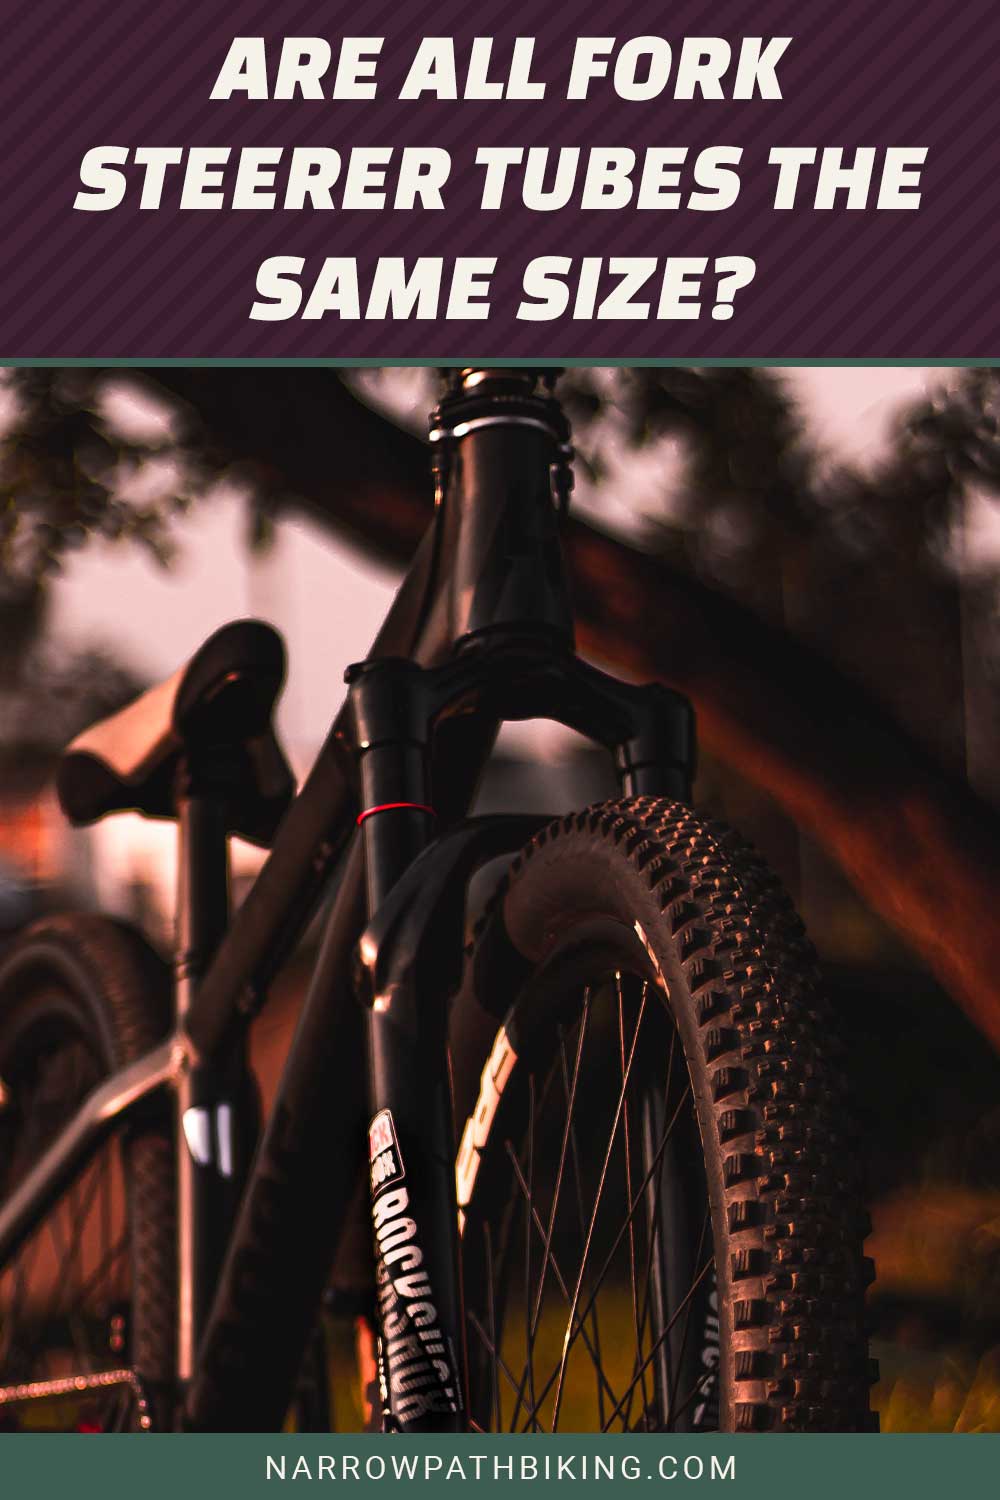 A mountain bike during dusk - Are All Fork Steerer Tubes the Same Size?